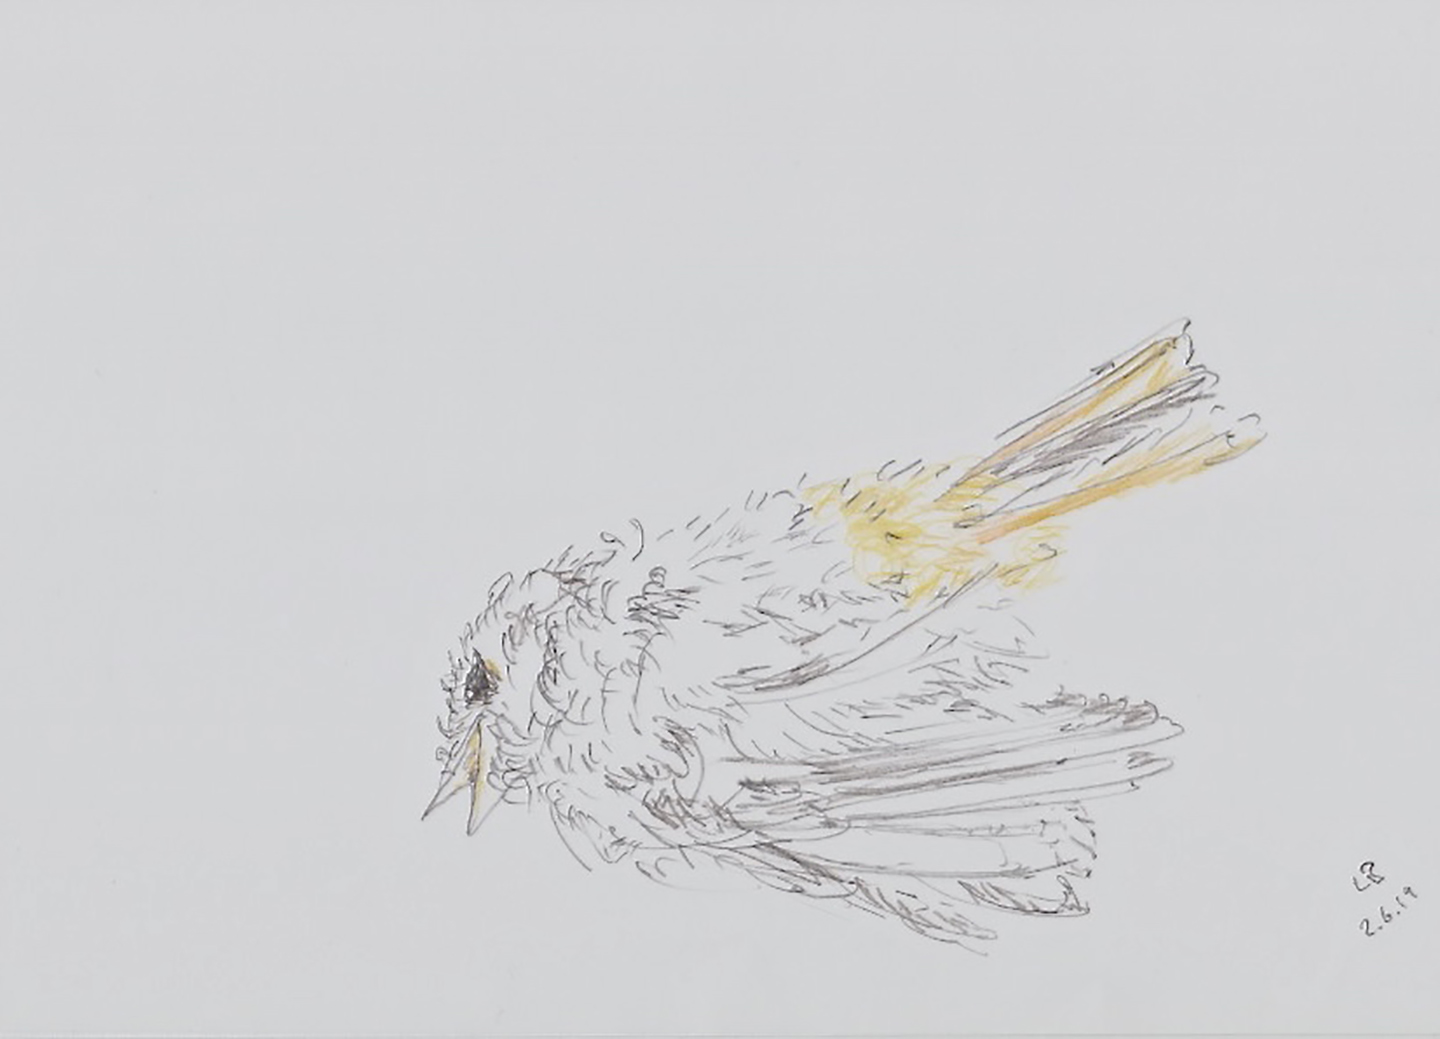 © Leo Brunschwiler, dead redtail, pencil and coloured pencil on polyester film, 20 cm x 28 cm , 2019
(Found on 1 June 2019 on Via d'Umbrail in Sta. Maria)